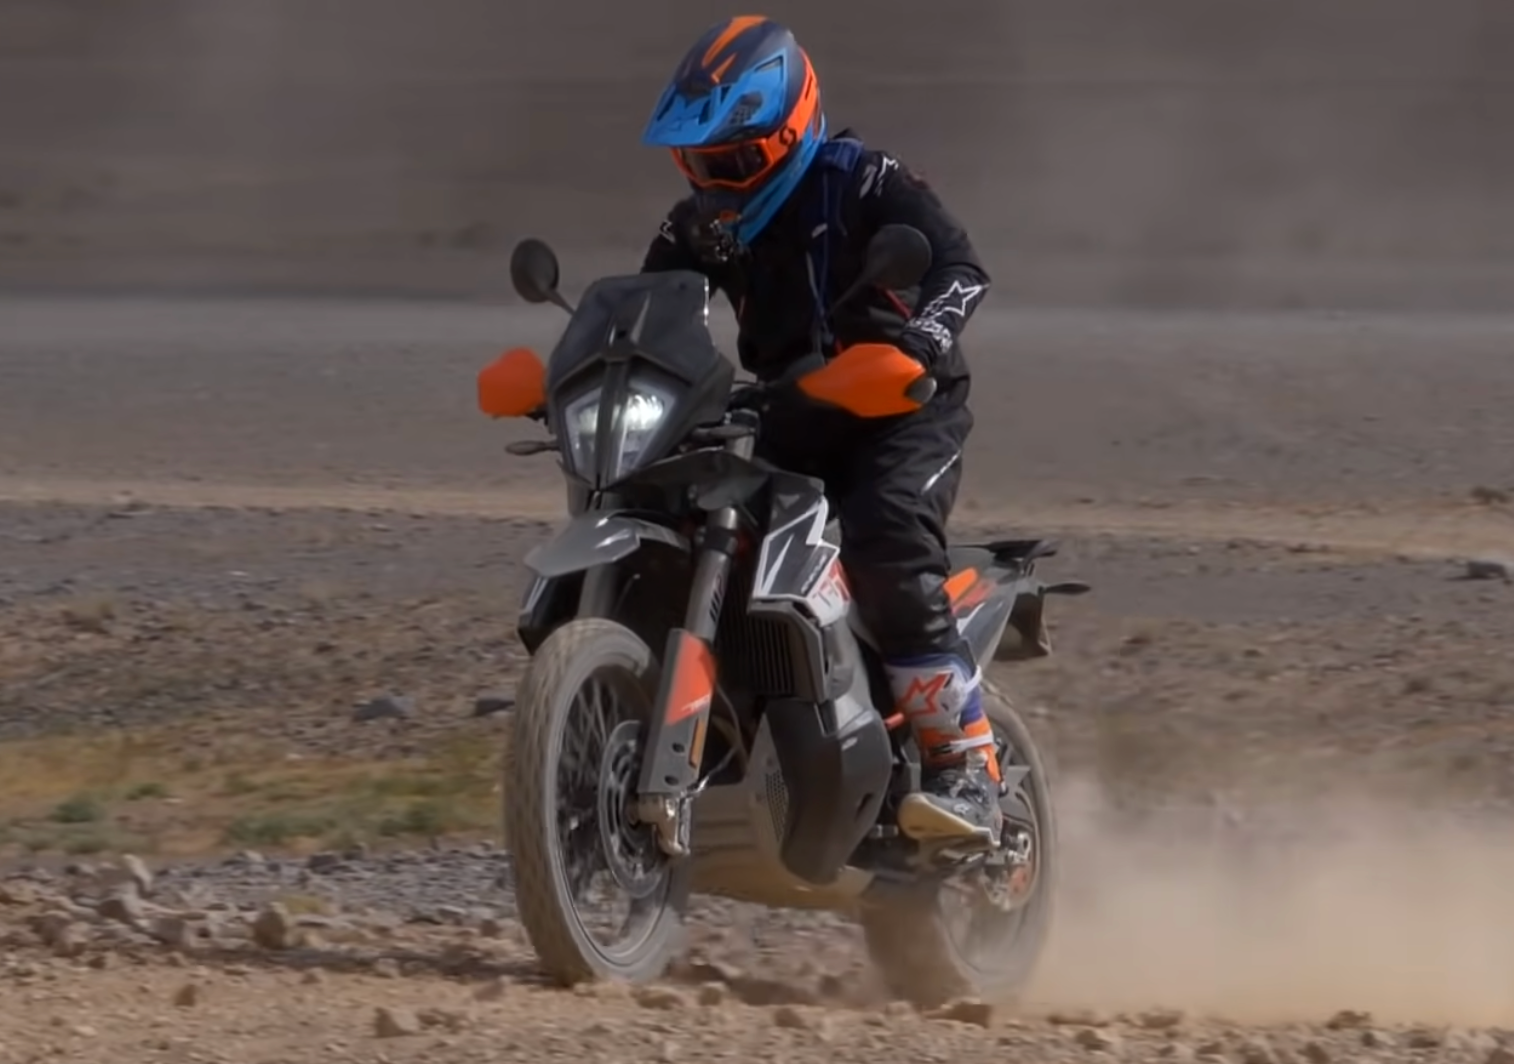 KTM 790 ADVENTURE R: INITIAL IMPRESSIONS FROM MOROCCO